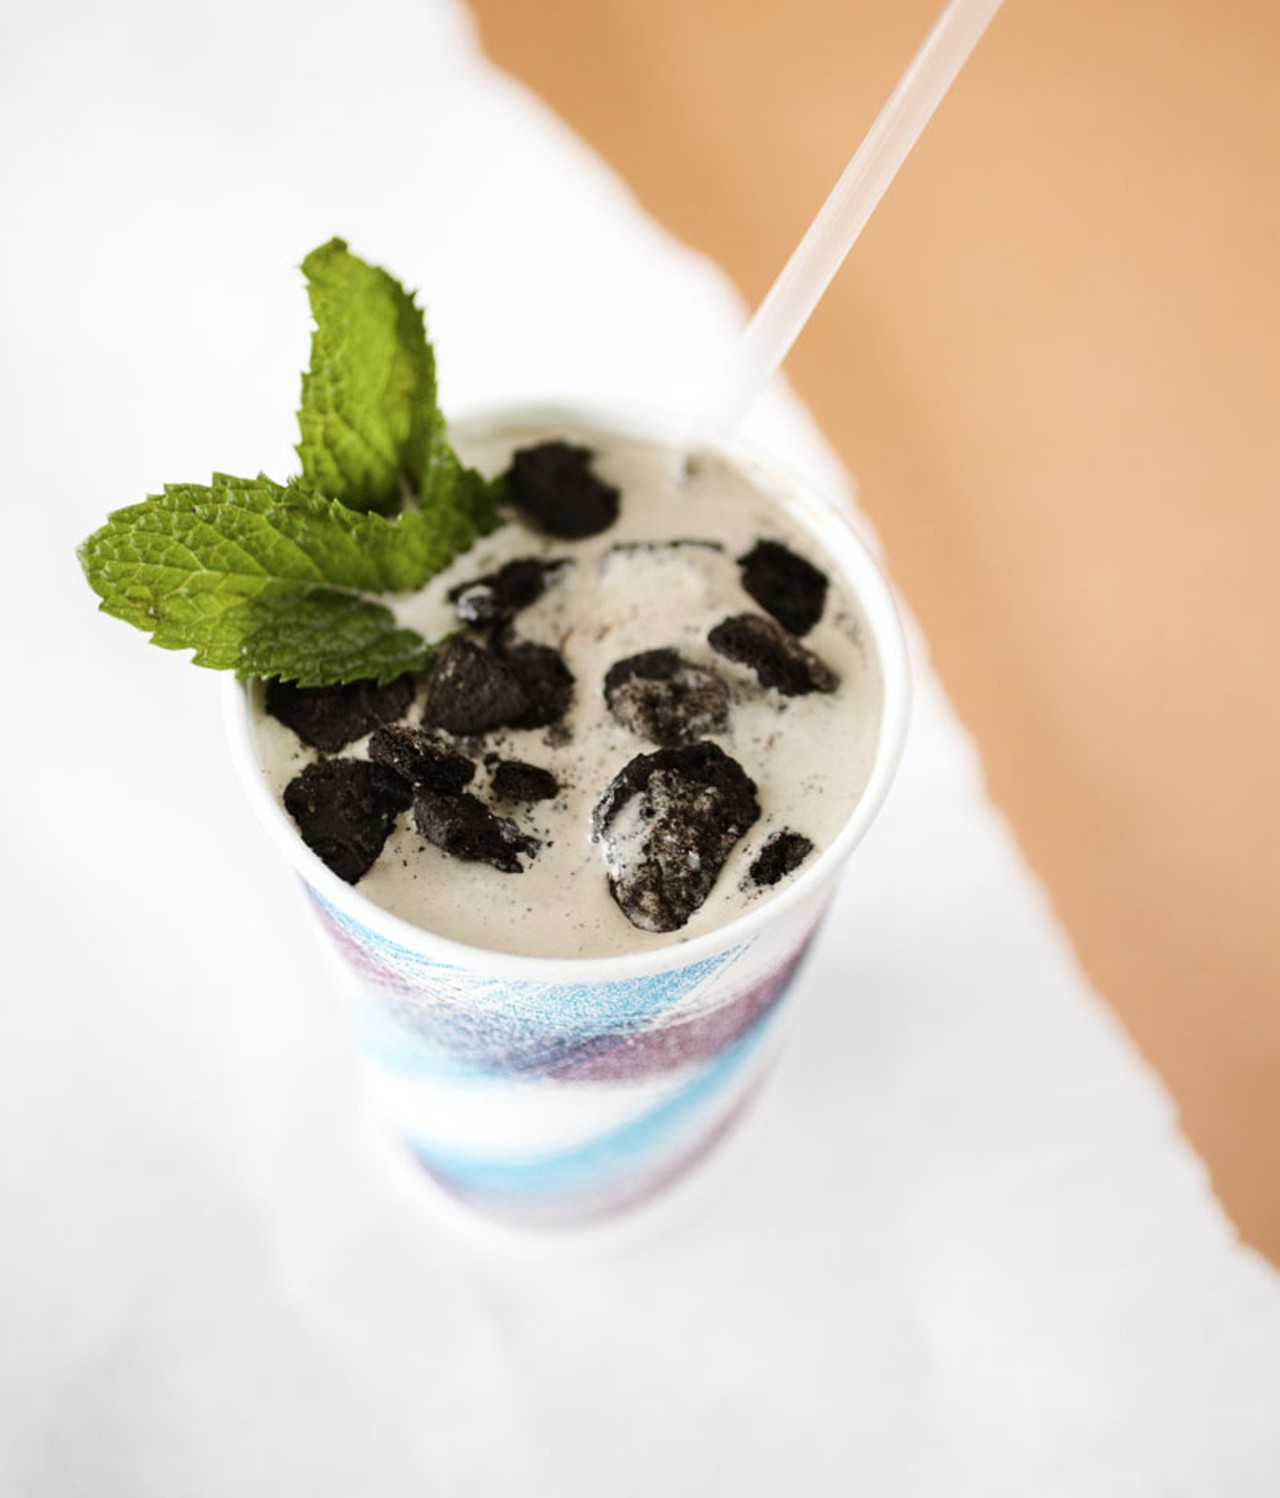 Also from Fozzie's Sweet Side menu is the Chocolate Julip signature shake. It is made with Oreos, fresh mint (from the garden out back) and fudge.